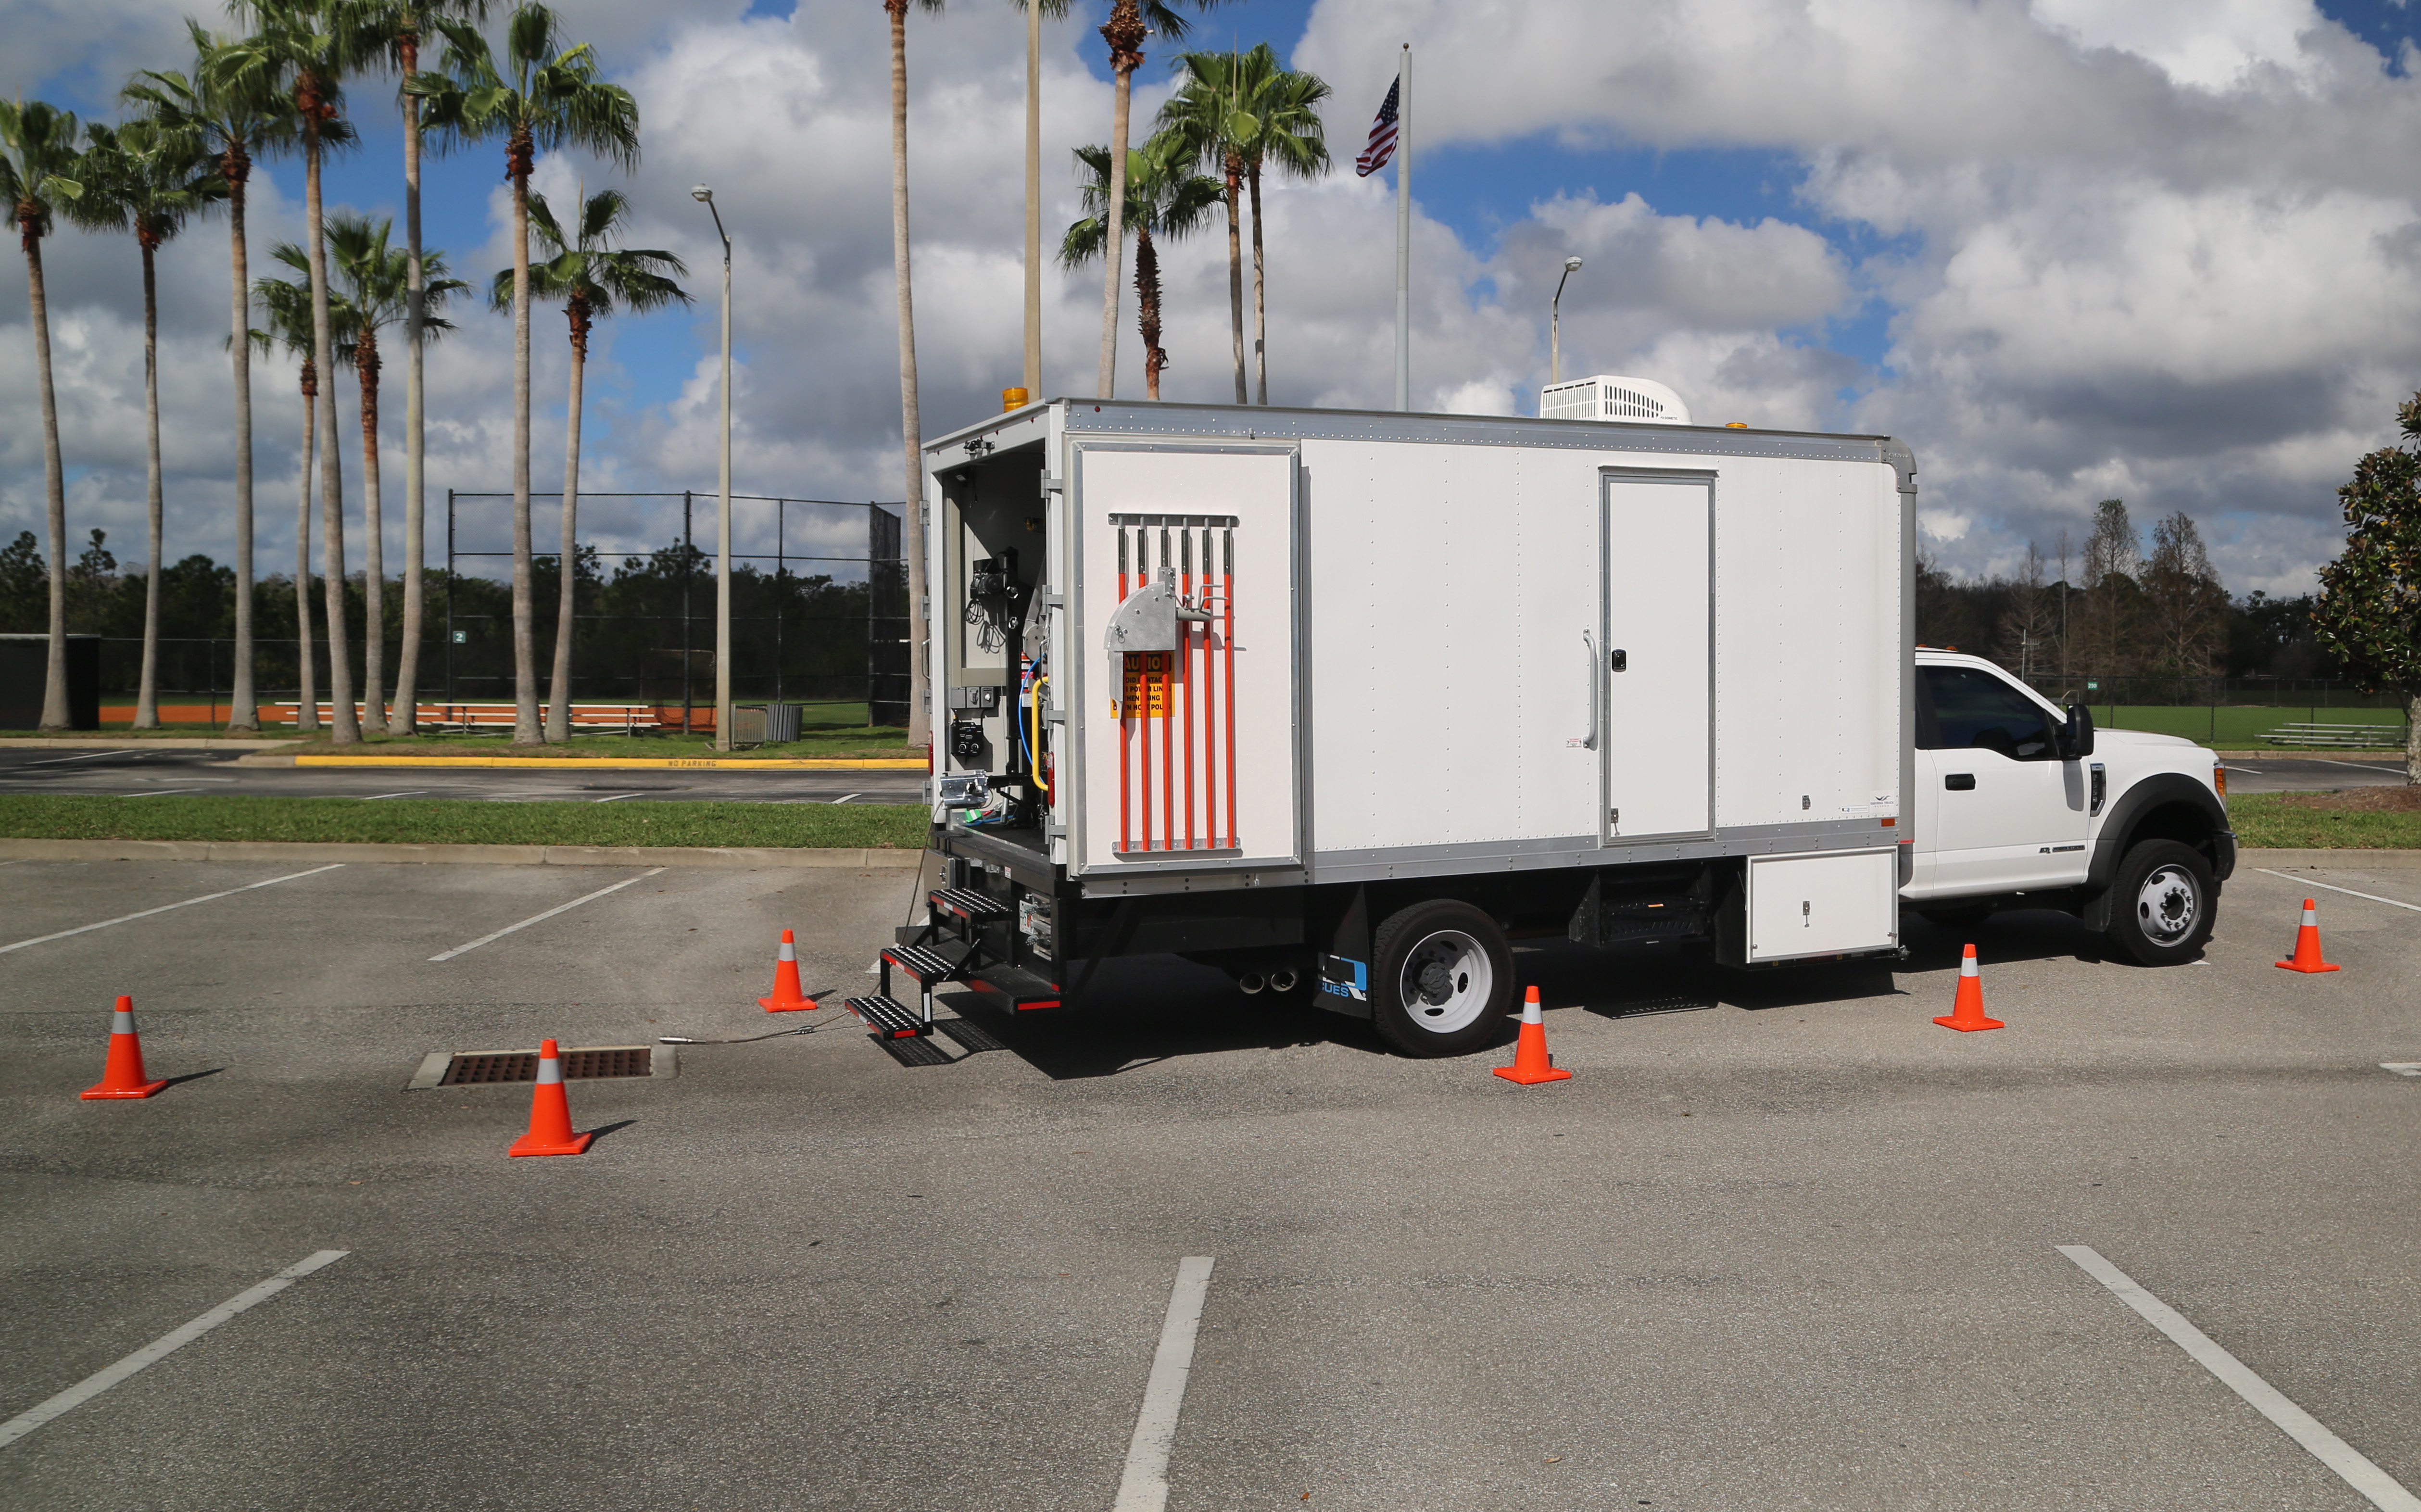 CUES Pre-Built, Demo and Trade_In Sewer and Pipeline Inspection Vehicles